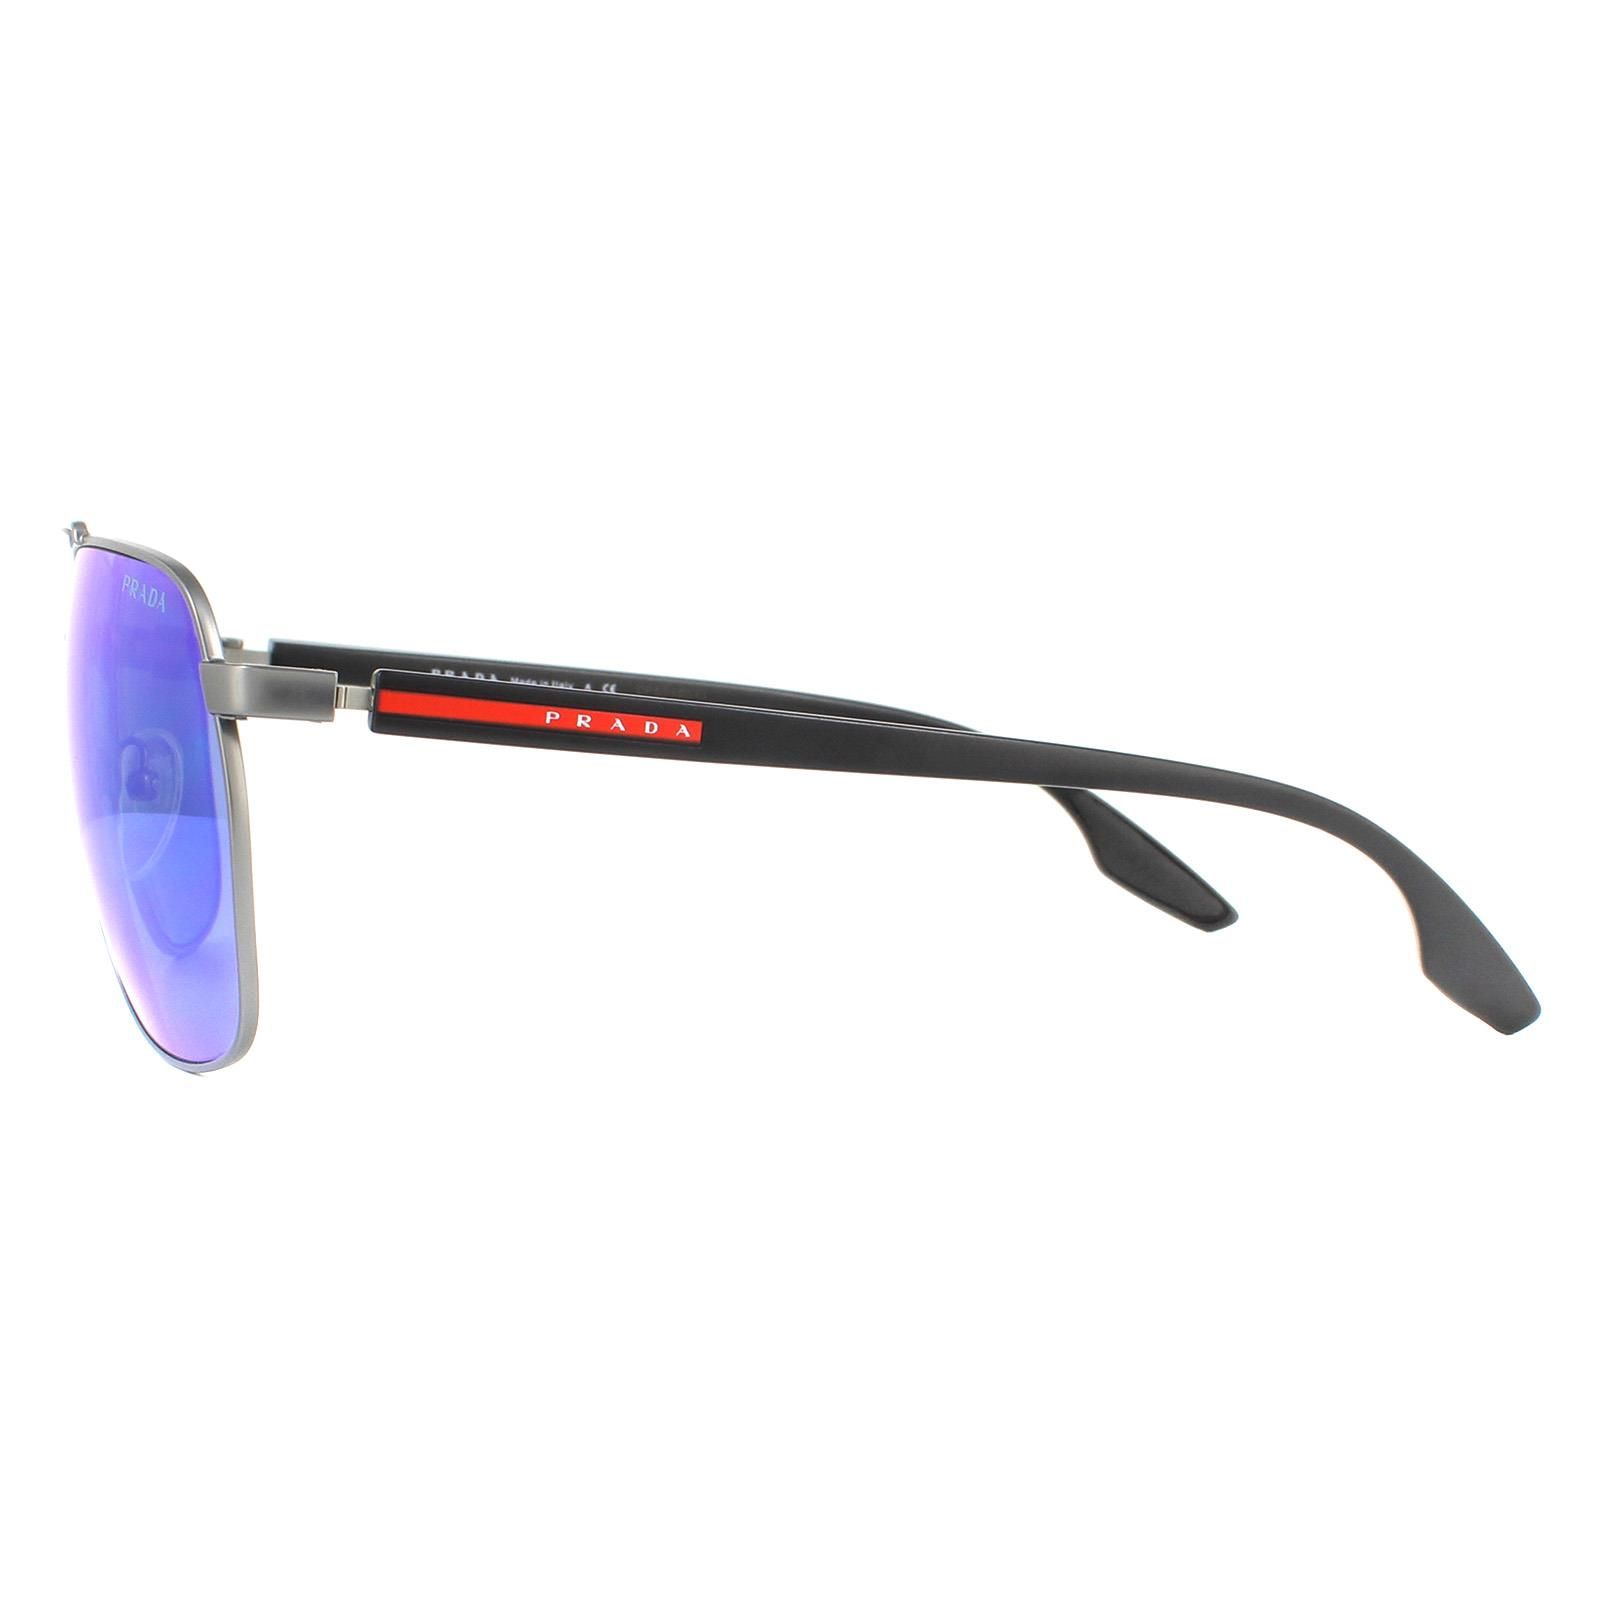 Prada Sport Sunglasses PS55VS 7CQ5M2 Matte Gunmetal Light Green Blue Mirror  are a contemporary and lightweight aviator style with a distinctive double bridge and iconic Prada Sport red stripe branding along the temples.